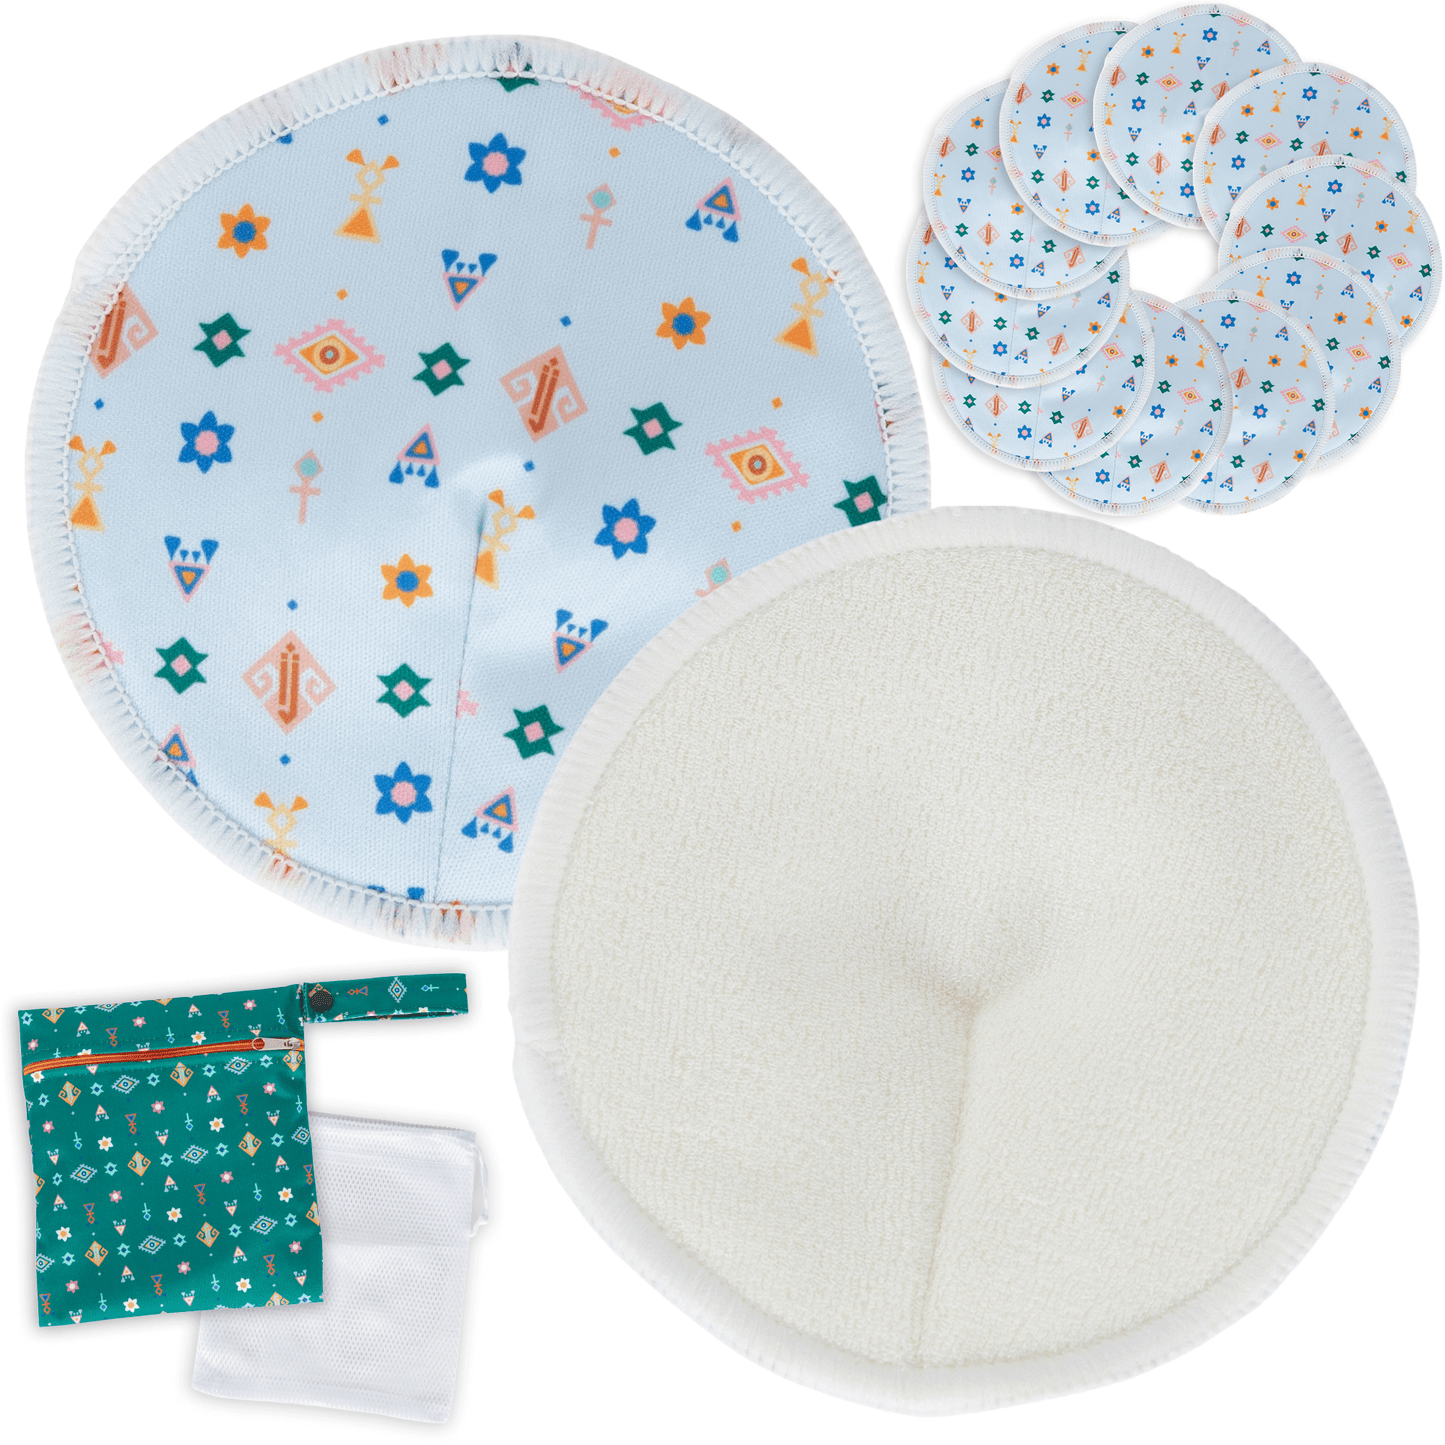 Beaming Baby Washable Extra Soft Nursing Breast Pads (2 pairs) 